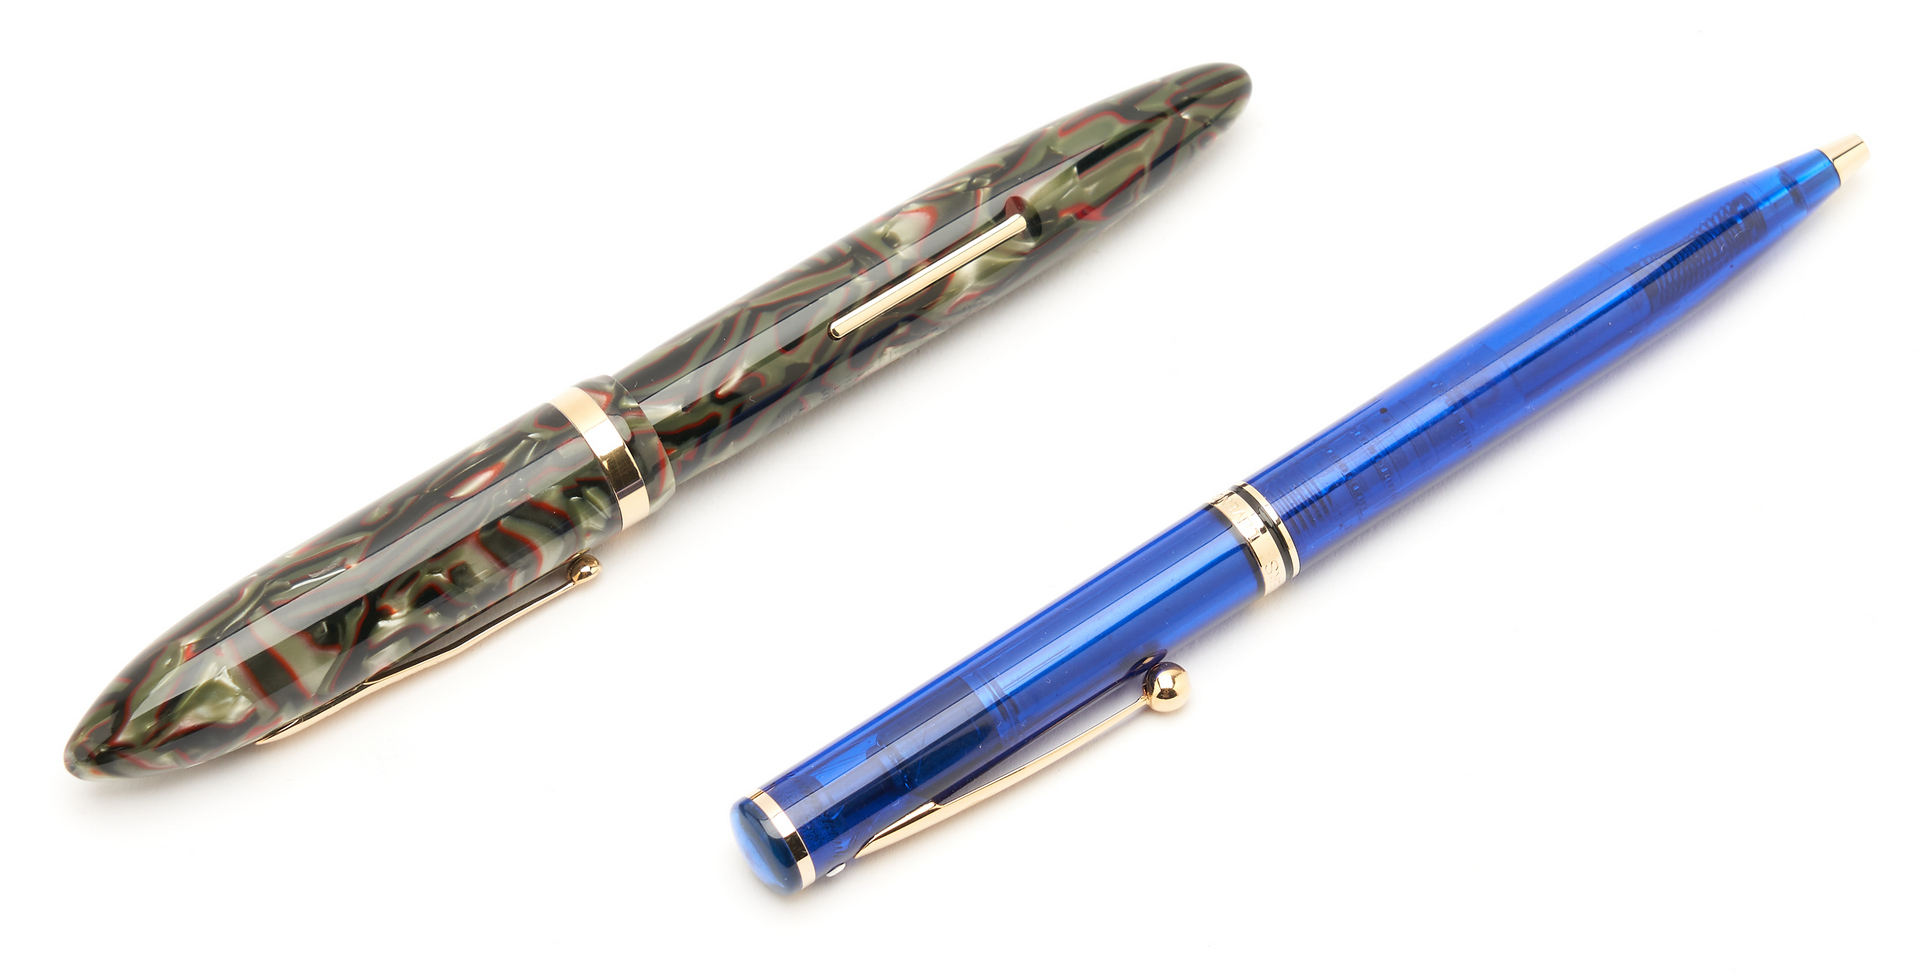 Lot 30: 11 Luxury Writing Instruments, incl. Montblanc, Waterman